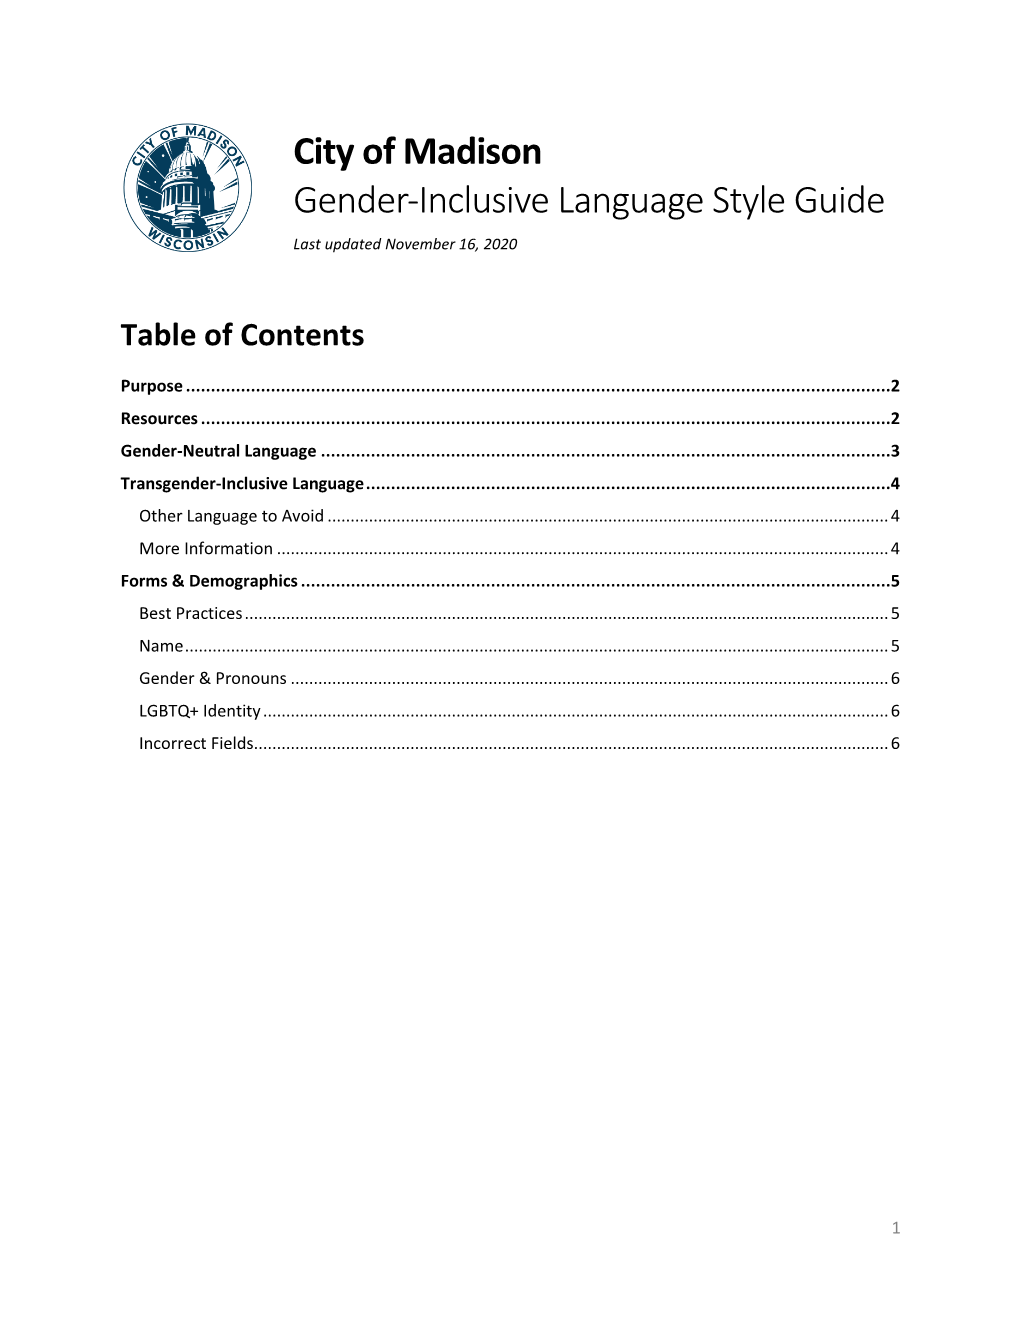 Gender-Inclusive Language Style Guide Last Updated November 16, 2020